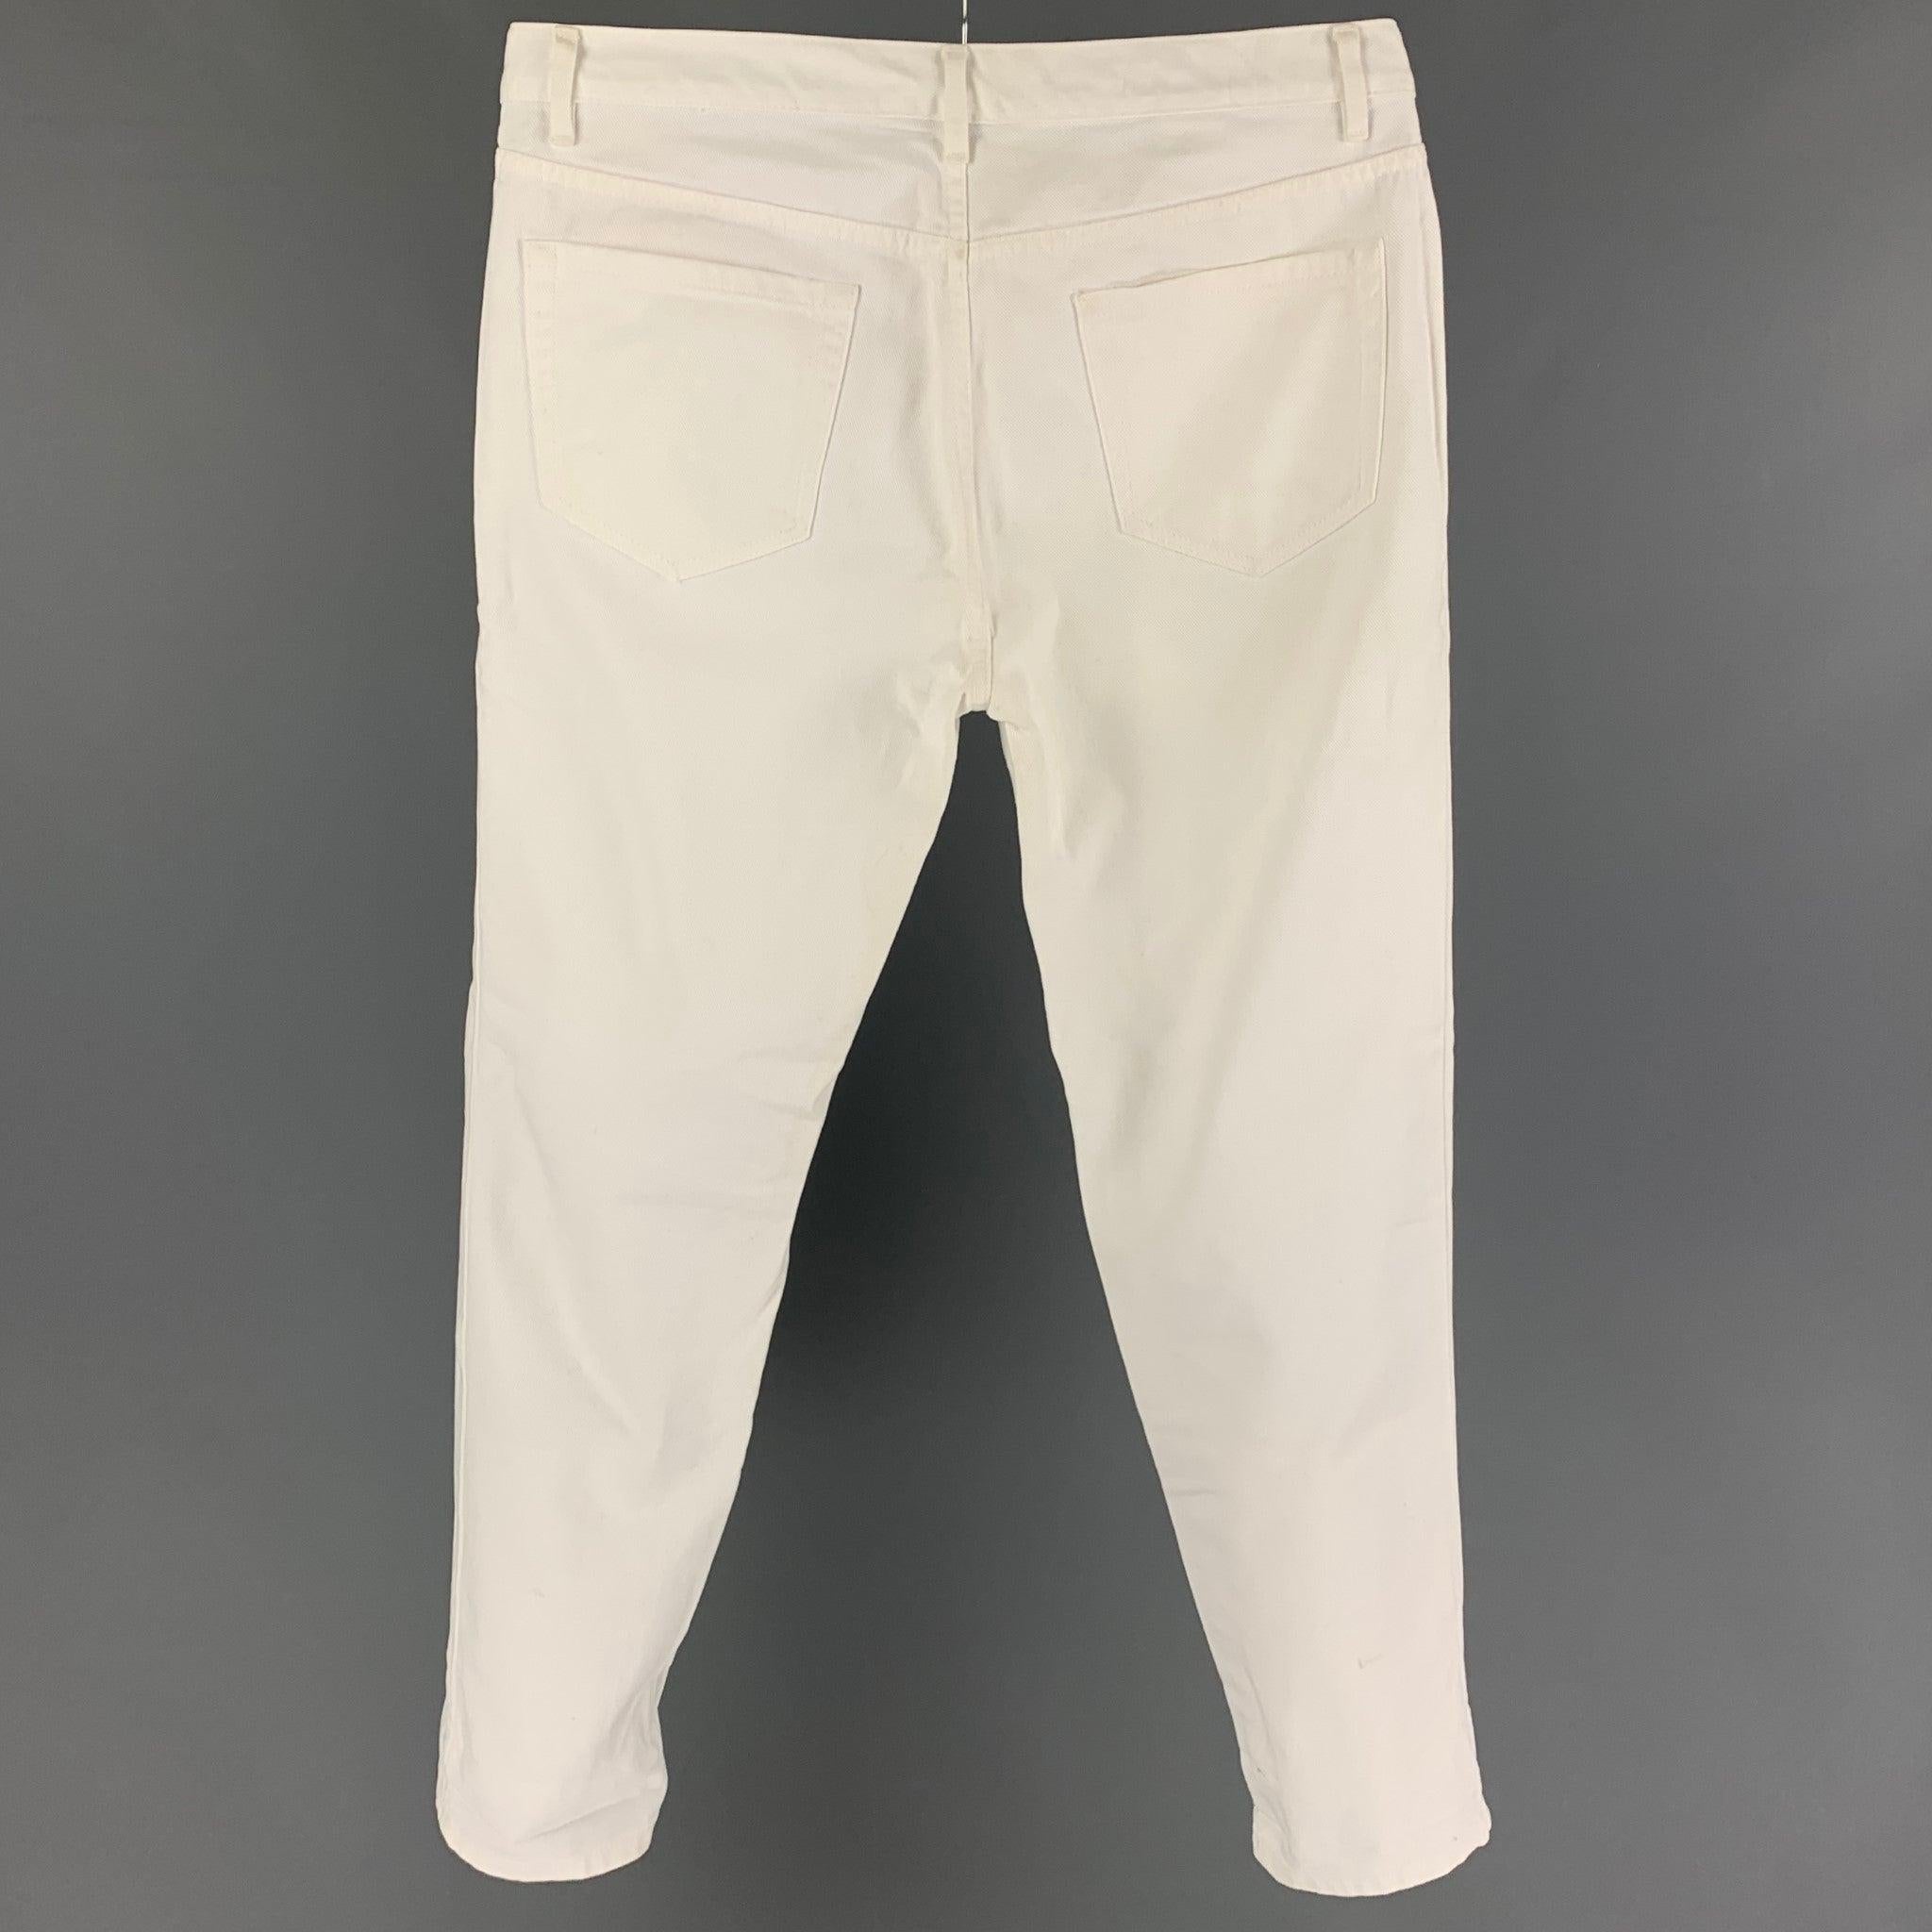 DRIES VAN NOTEN jeans comes in a white cotton featuring a slim fit and a zip fly closure.
Good
Pre-Owned Condition. Light discoloration. As-Is.  

Marked:   31 

Measurements: 
  Waist: 34 inches  Rise: 10 inches  Inseam: 29 inches 
  
  
